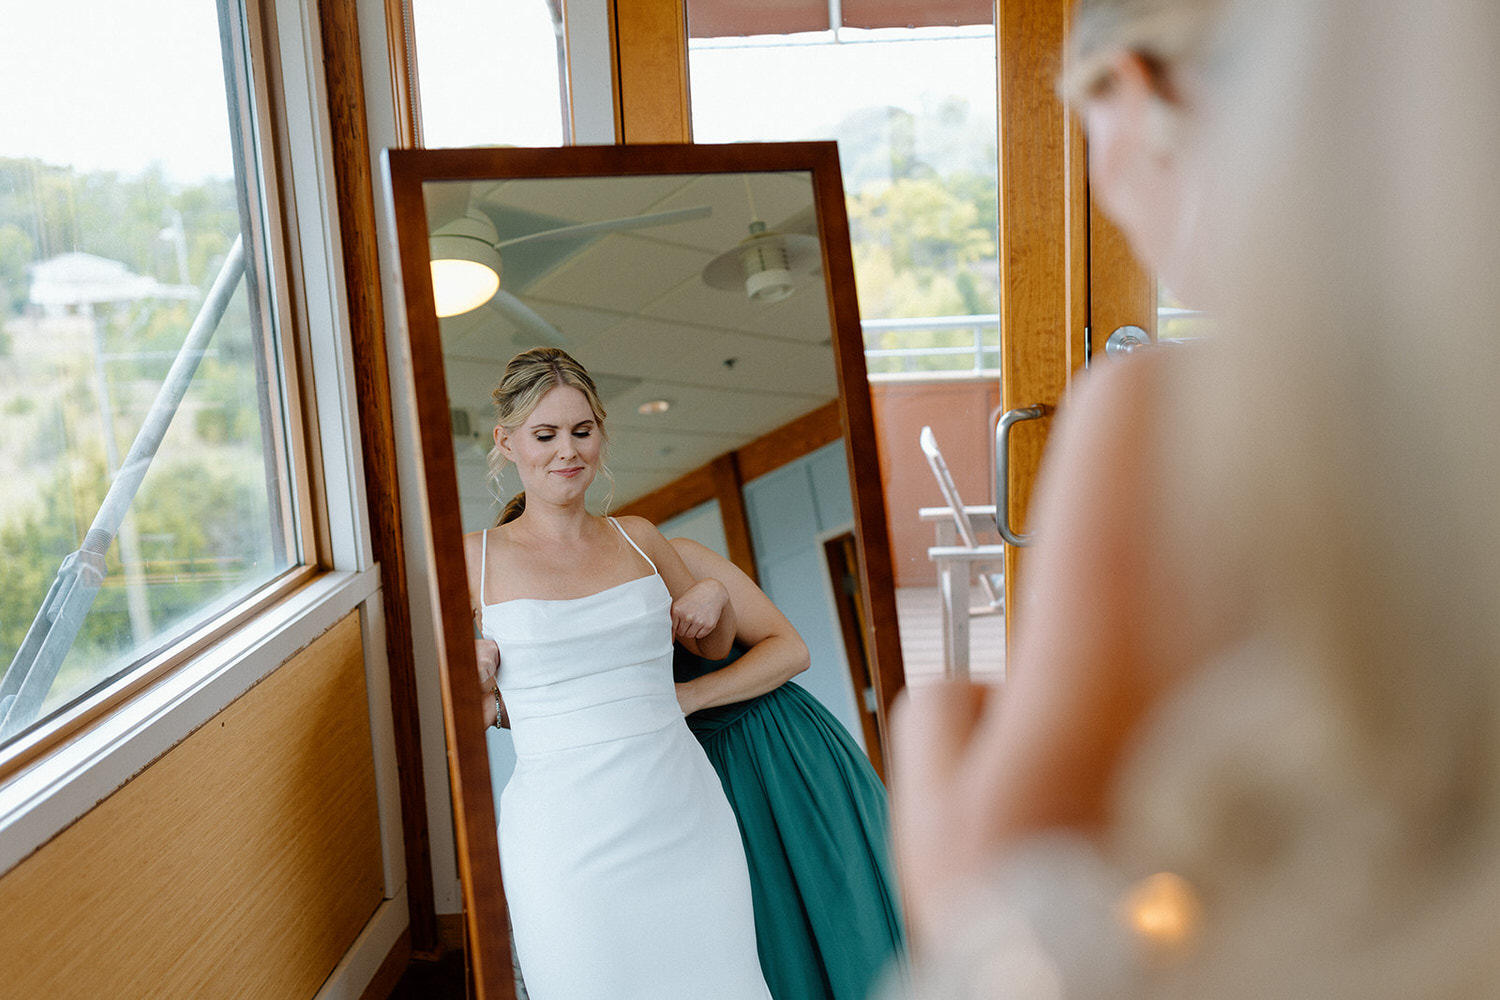 A bride in a simple white wedding dress stands reflected in a full-length mirror, adjusting her dress while another woman in a teal dress stands nearby, both in a room with wooden interiors and large windows.